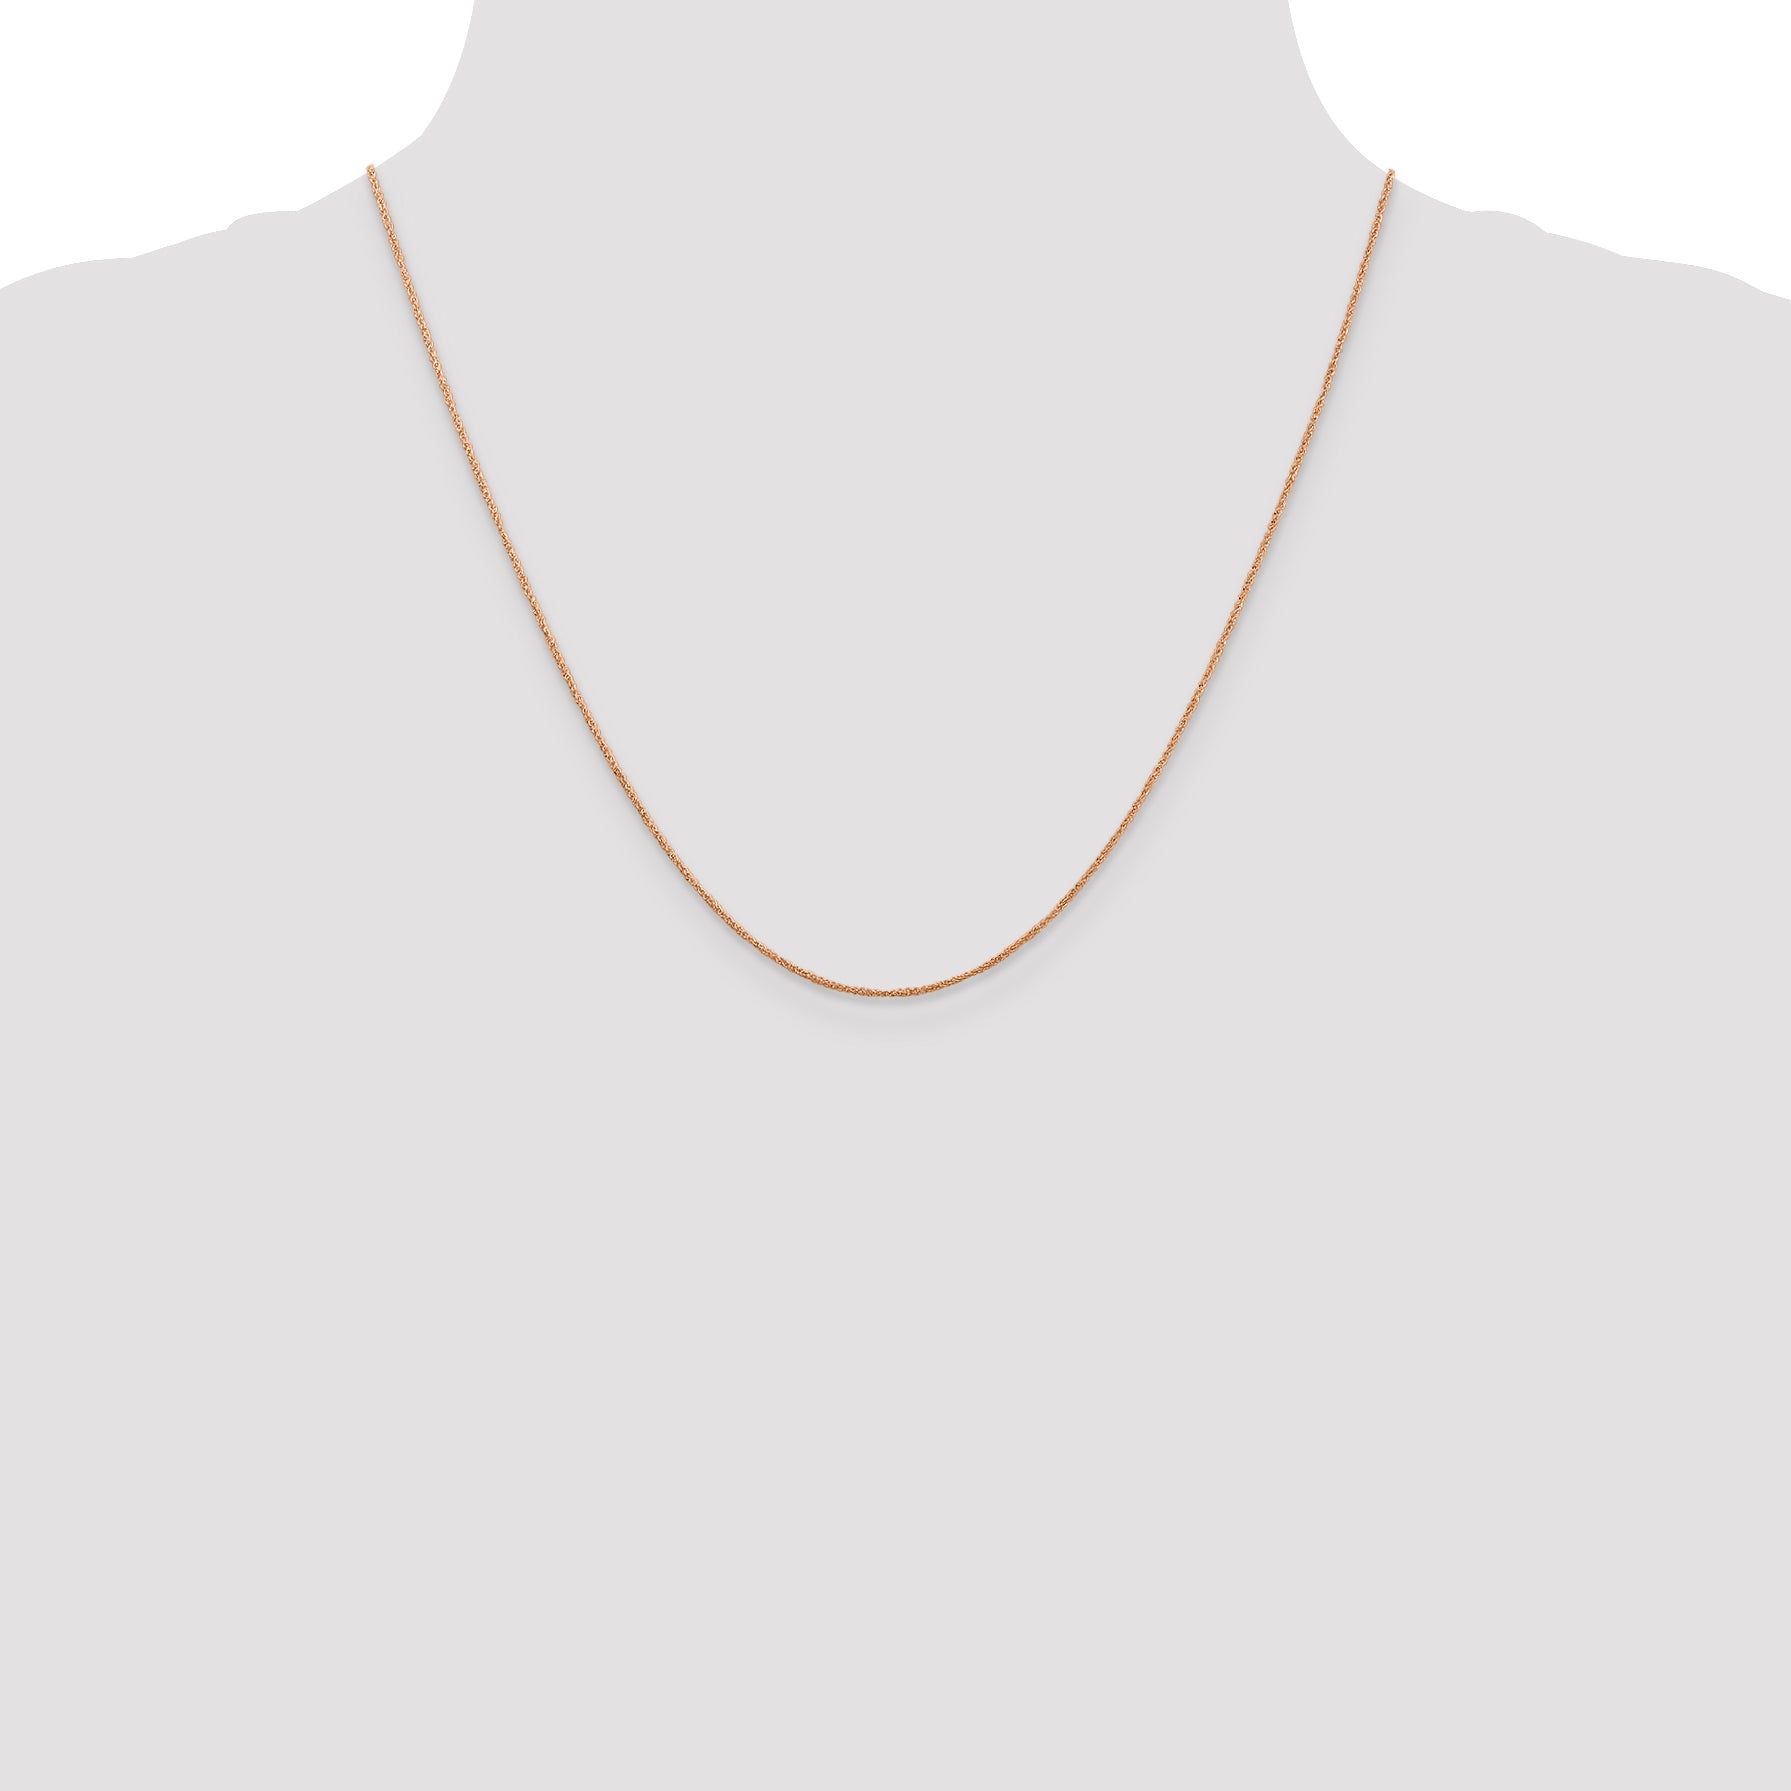 14K Rose Gold 16 inch .7mm Ropa with Spring Ring Clasp Chain